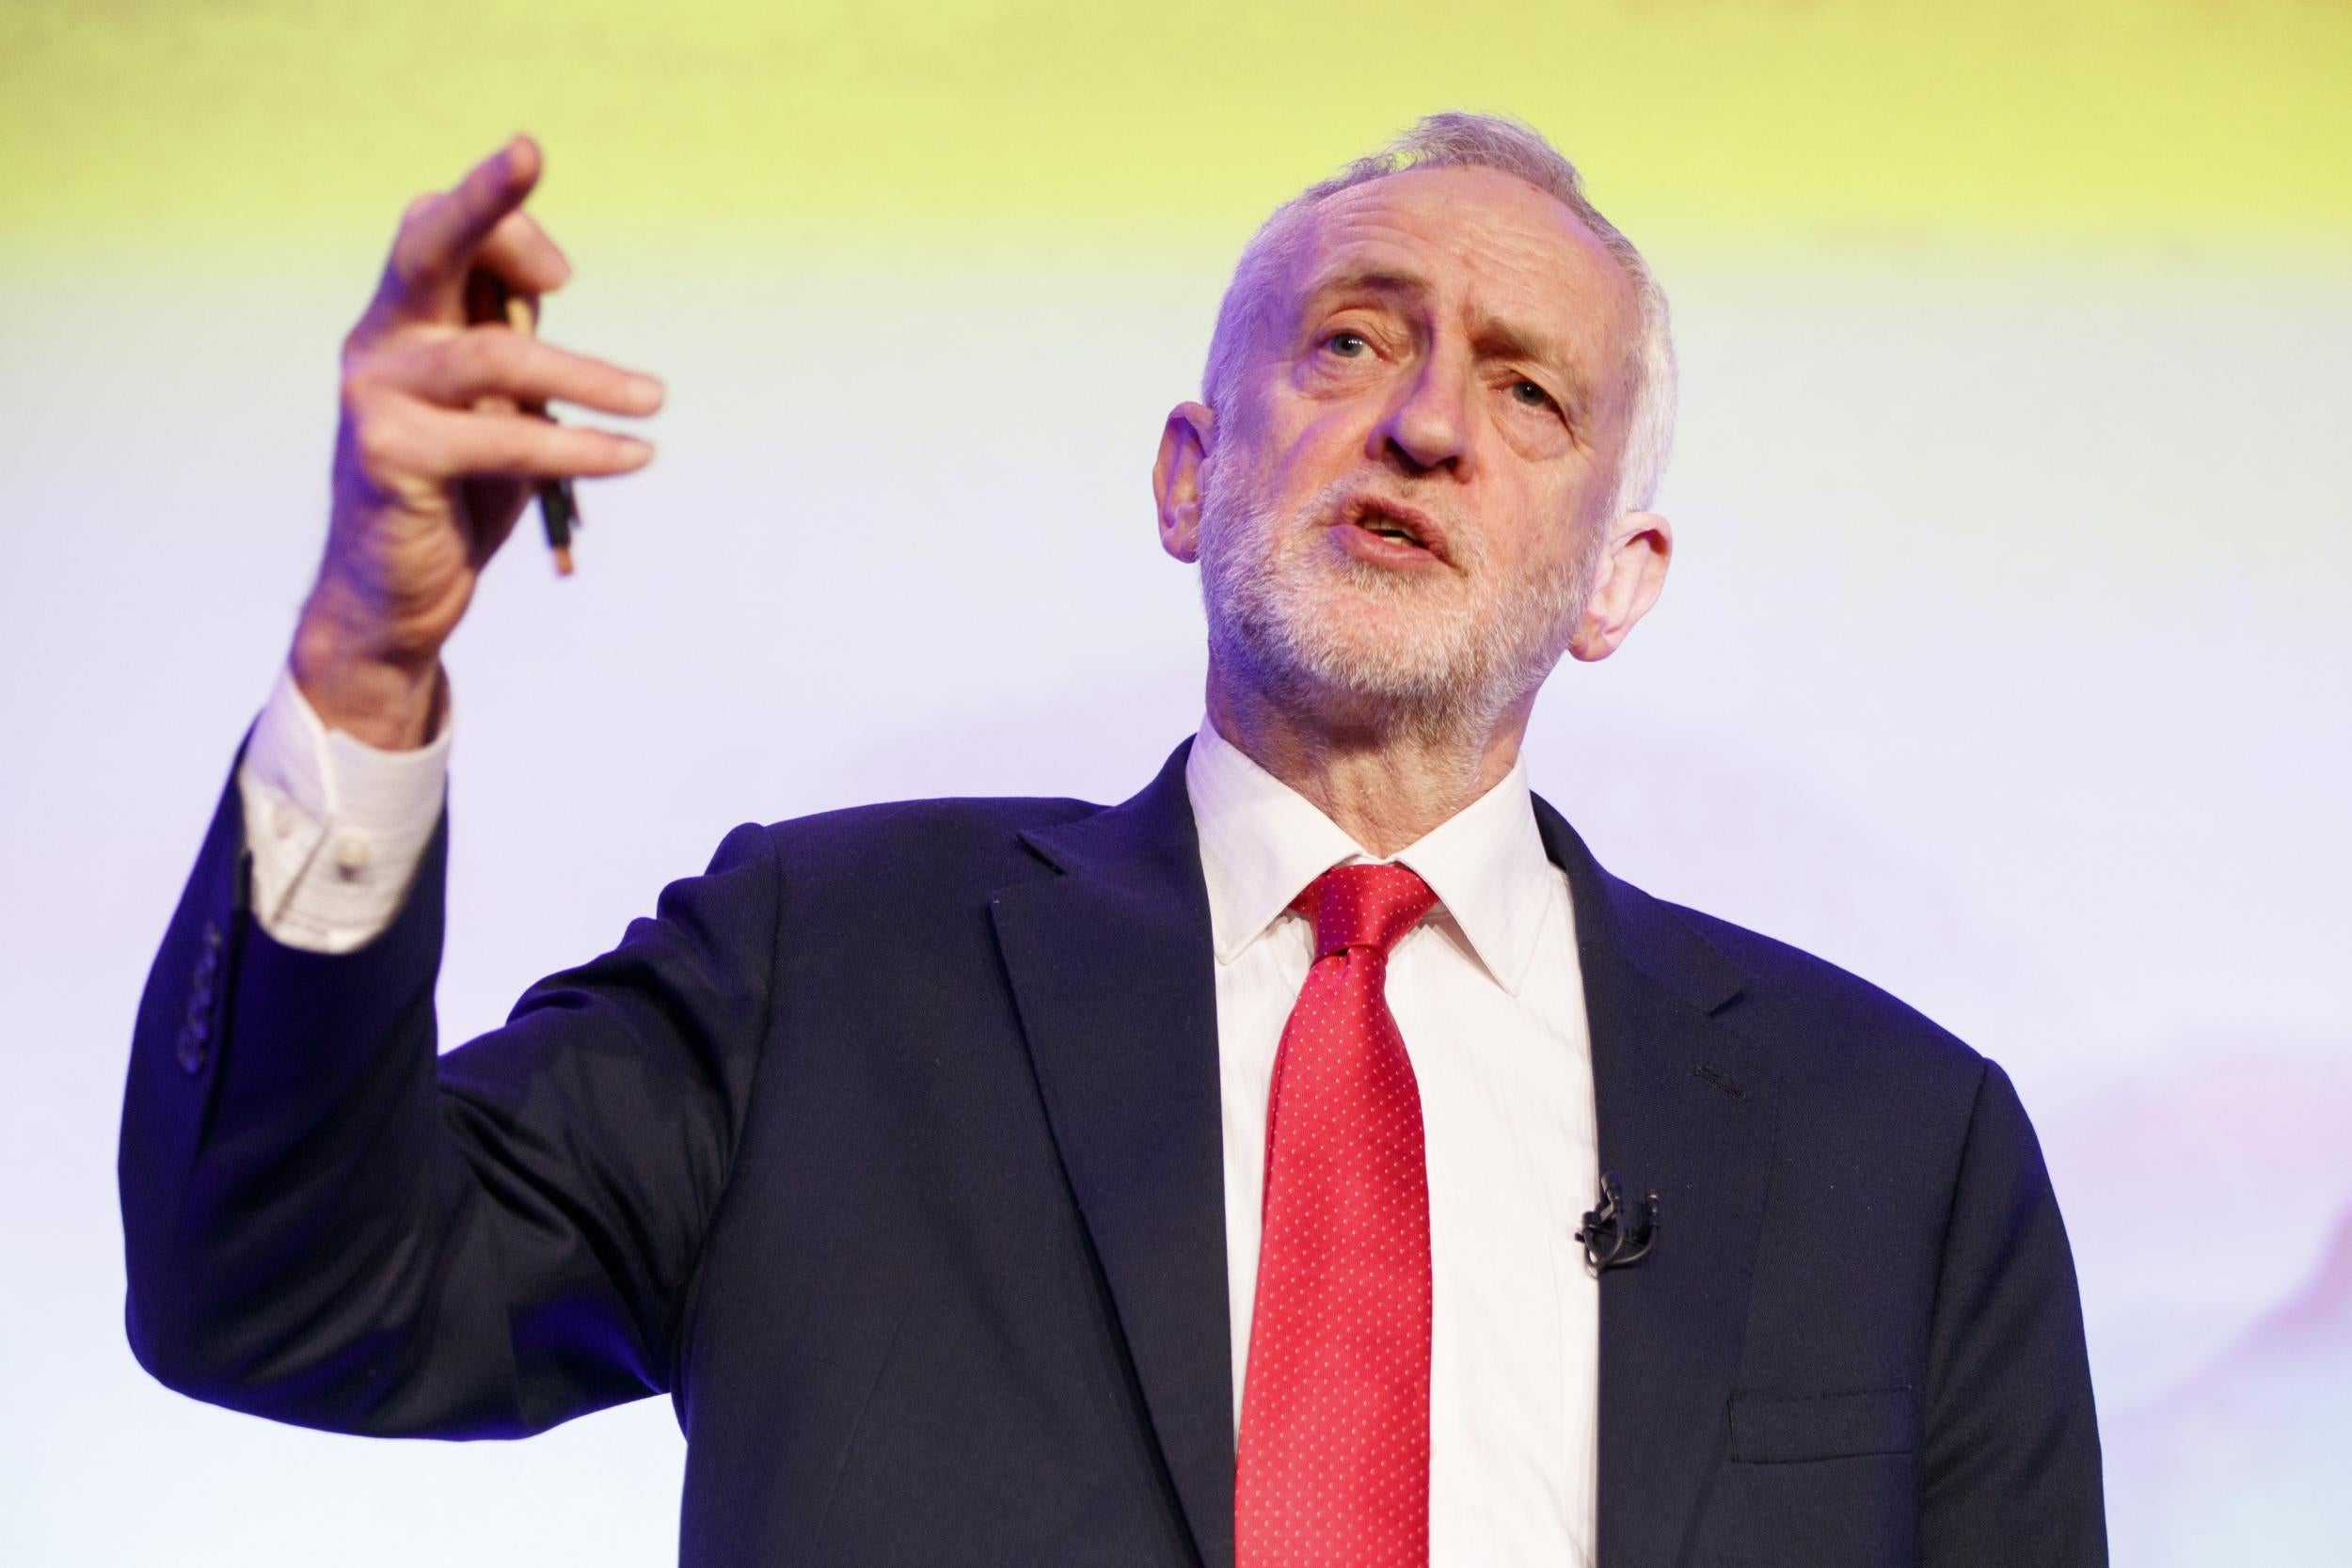 Labour leader Jeremy Corbyn has been urged to commit to remaining in the single market after Brexit